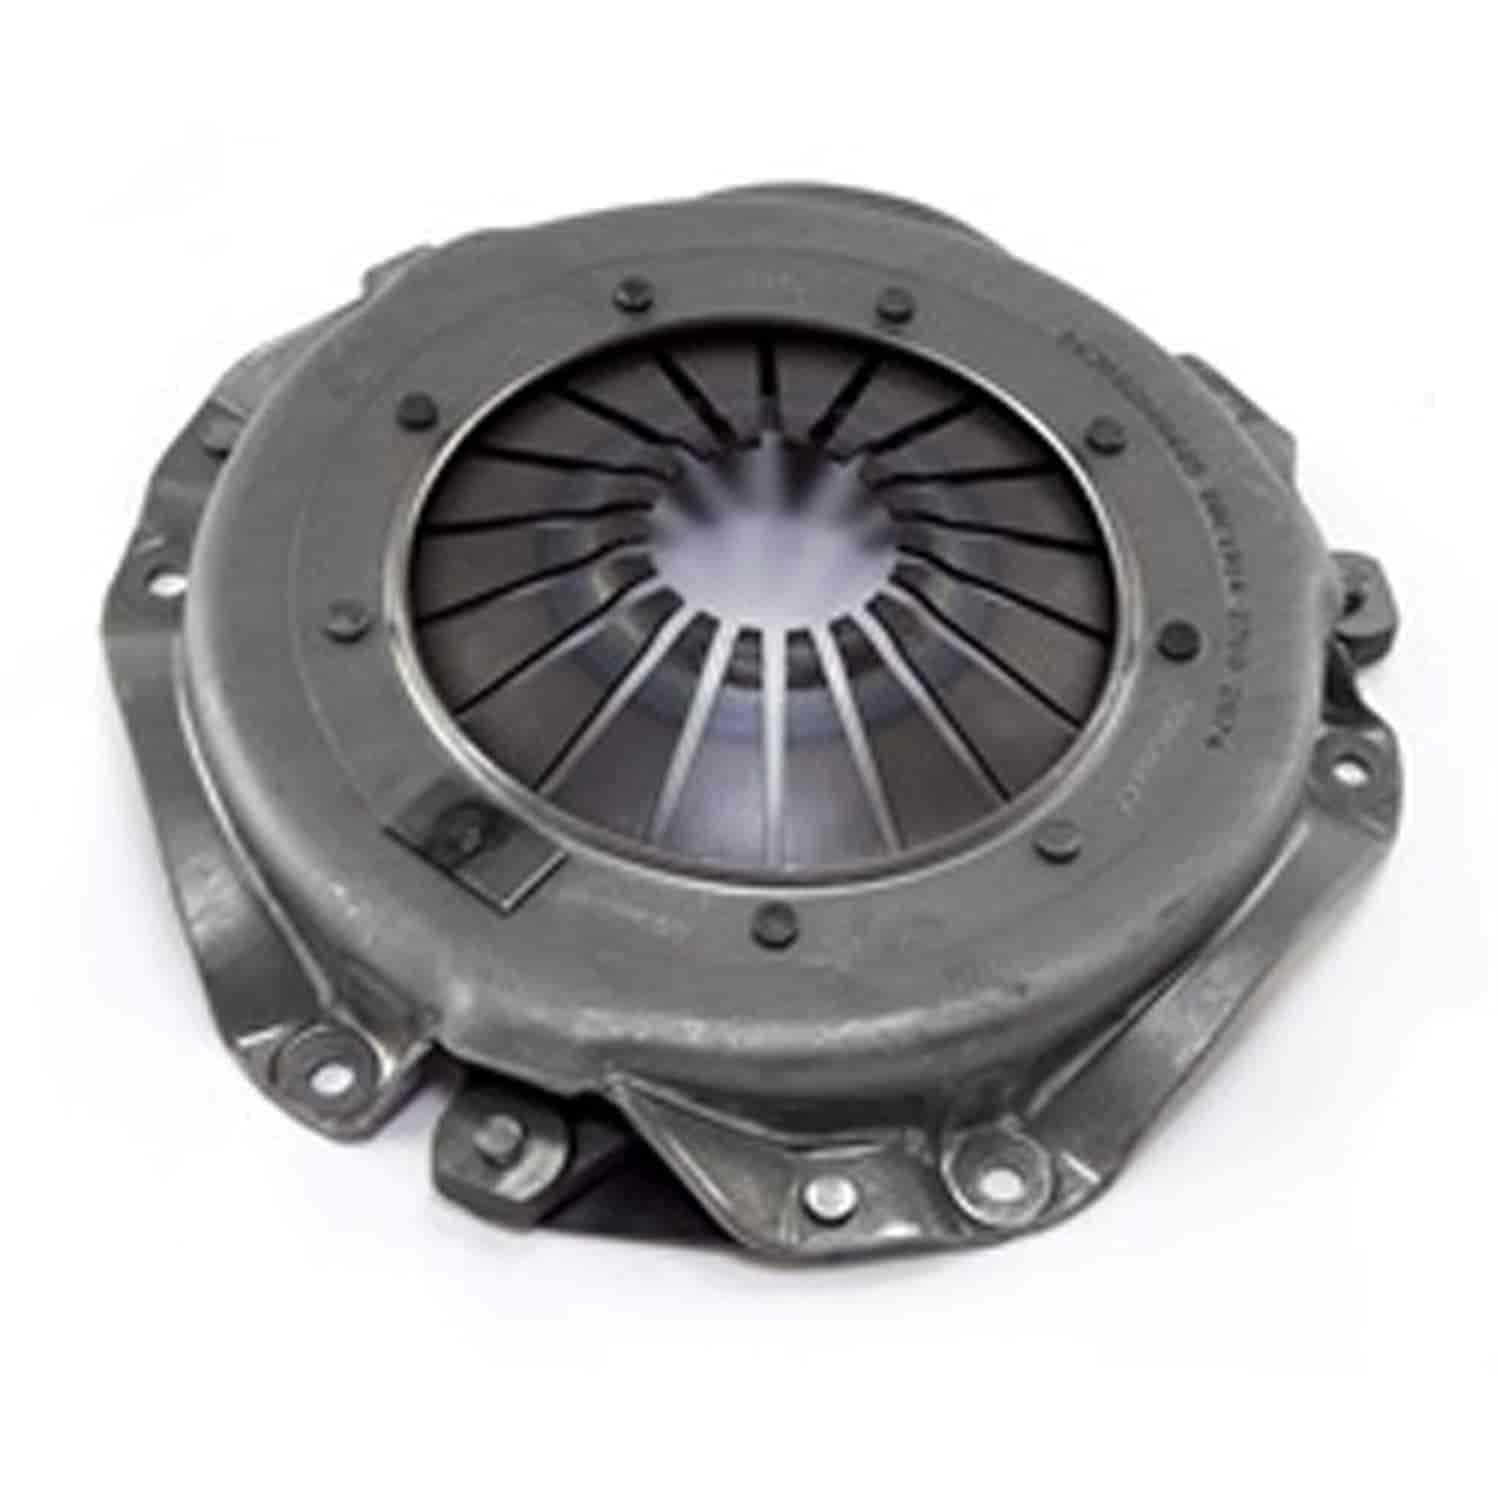 This 9 1/8 inch pressure plate from Omix-ADA fits 84-90 and 97-01 Jeep Cherokees and 87-90 and 97-02